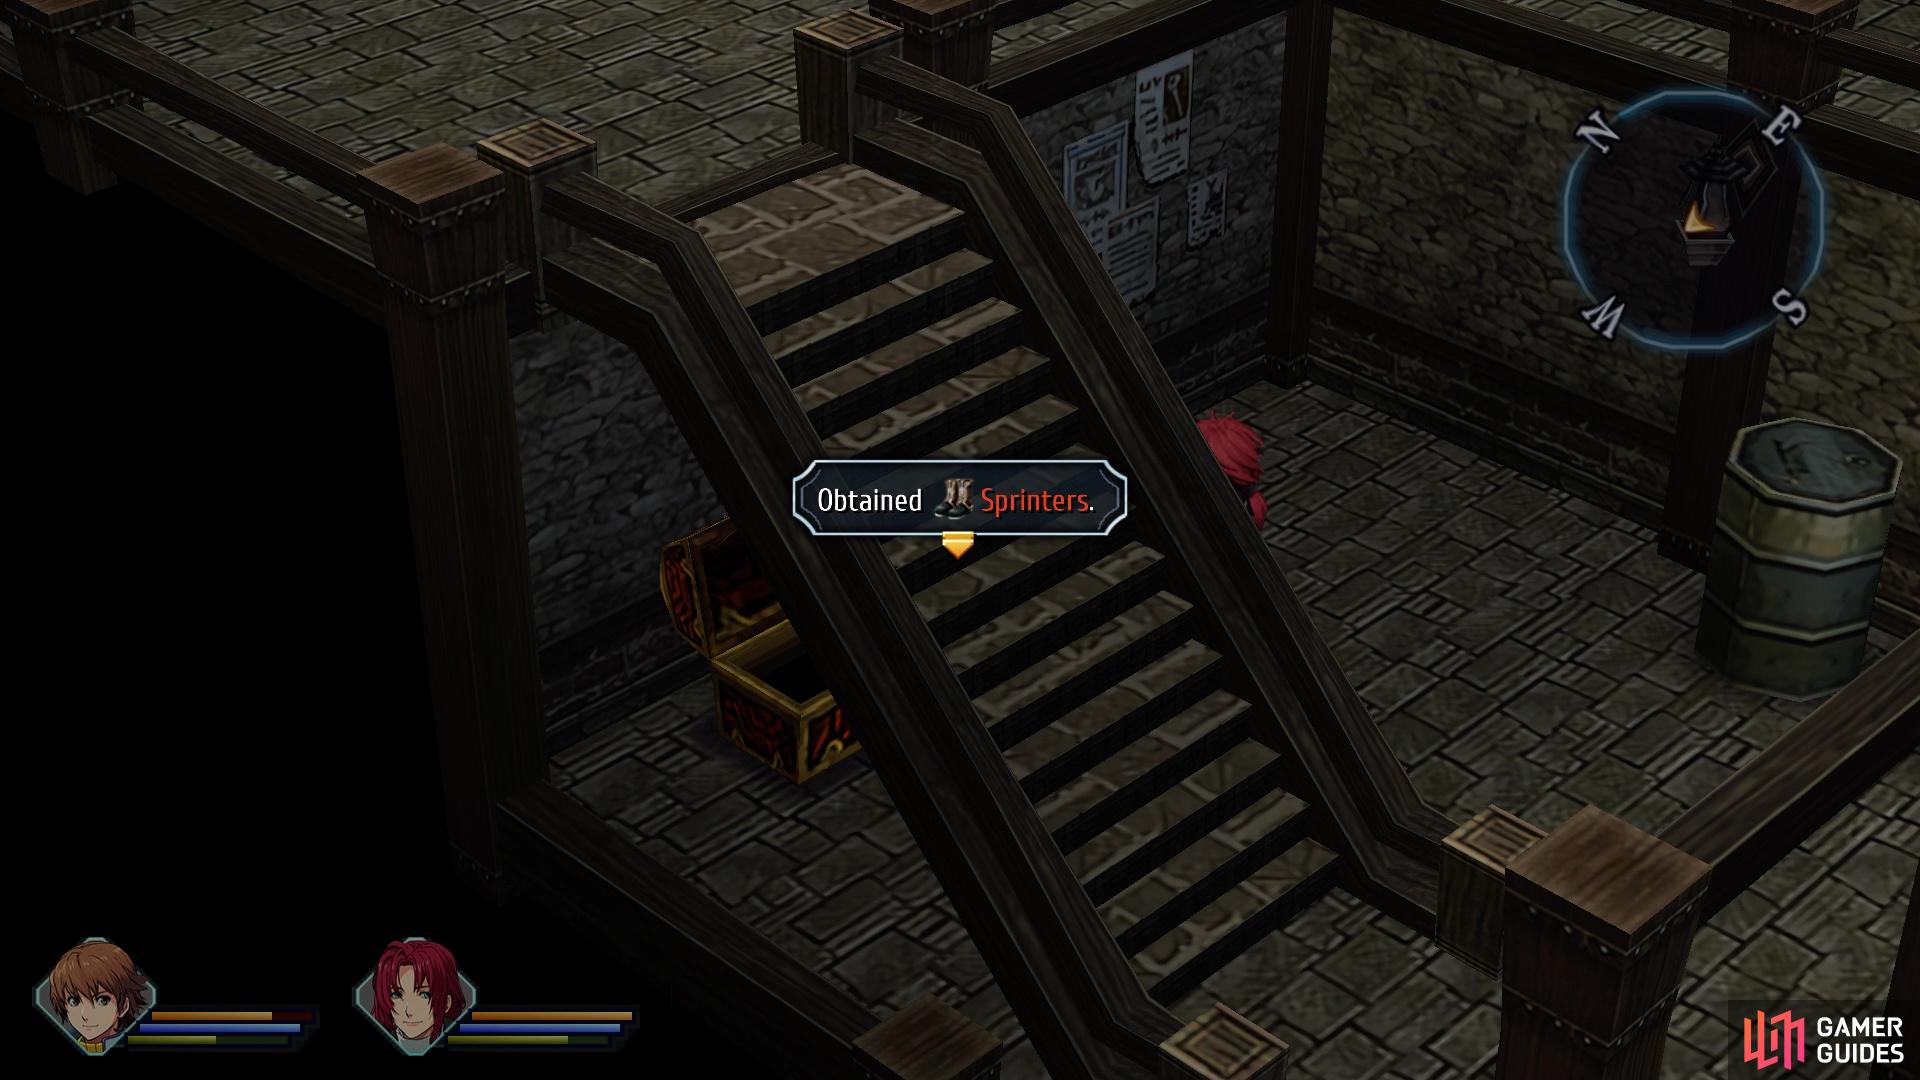 There is a chest with Sprinters underneath the stairs